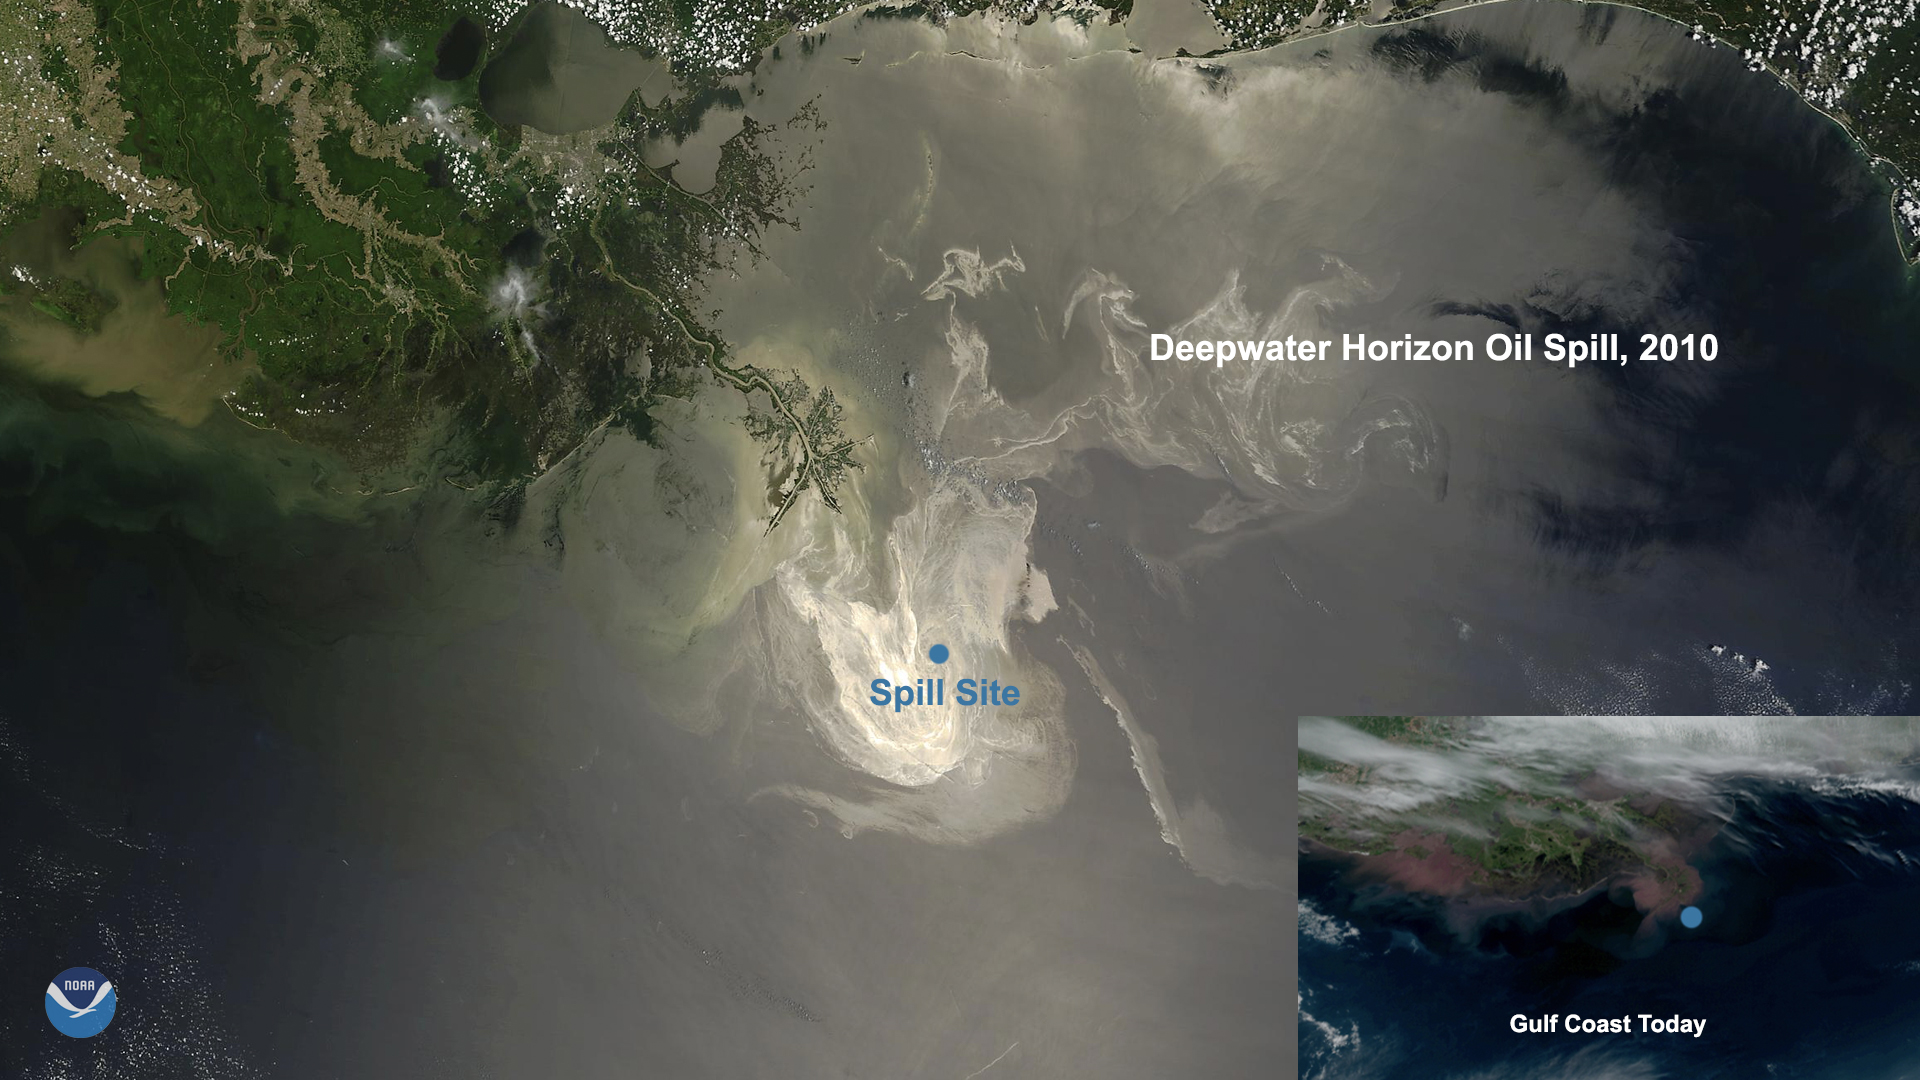 Satellite data shows the extent of the 2010 Deepwater Horizon oil spill on the ocean surface compared with the Gulf Coast  (right inset) in April 2020.